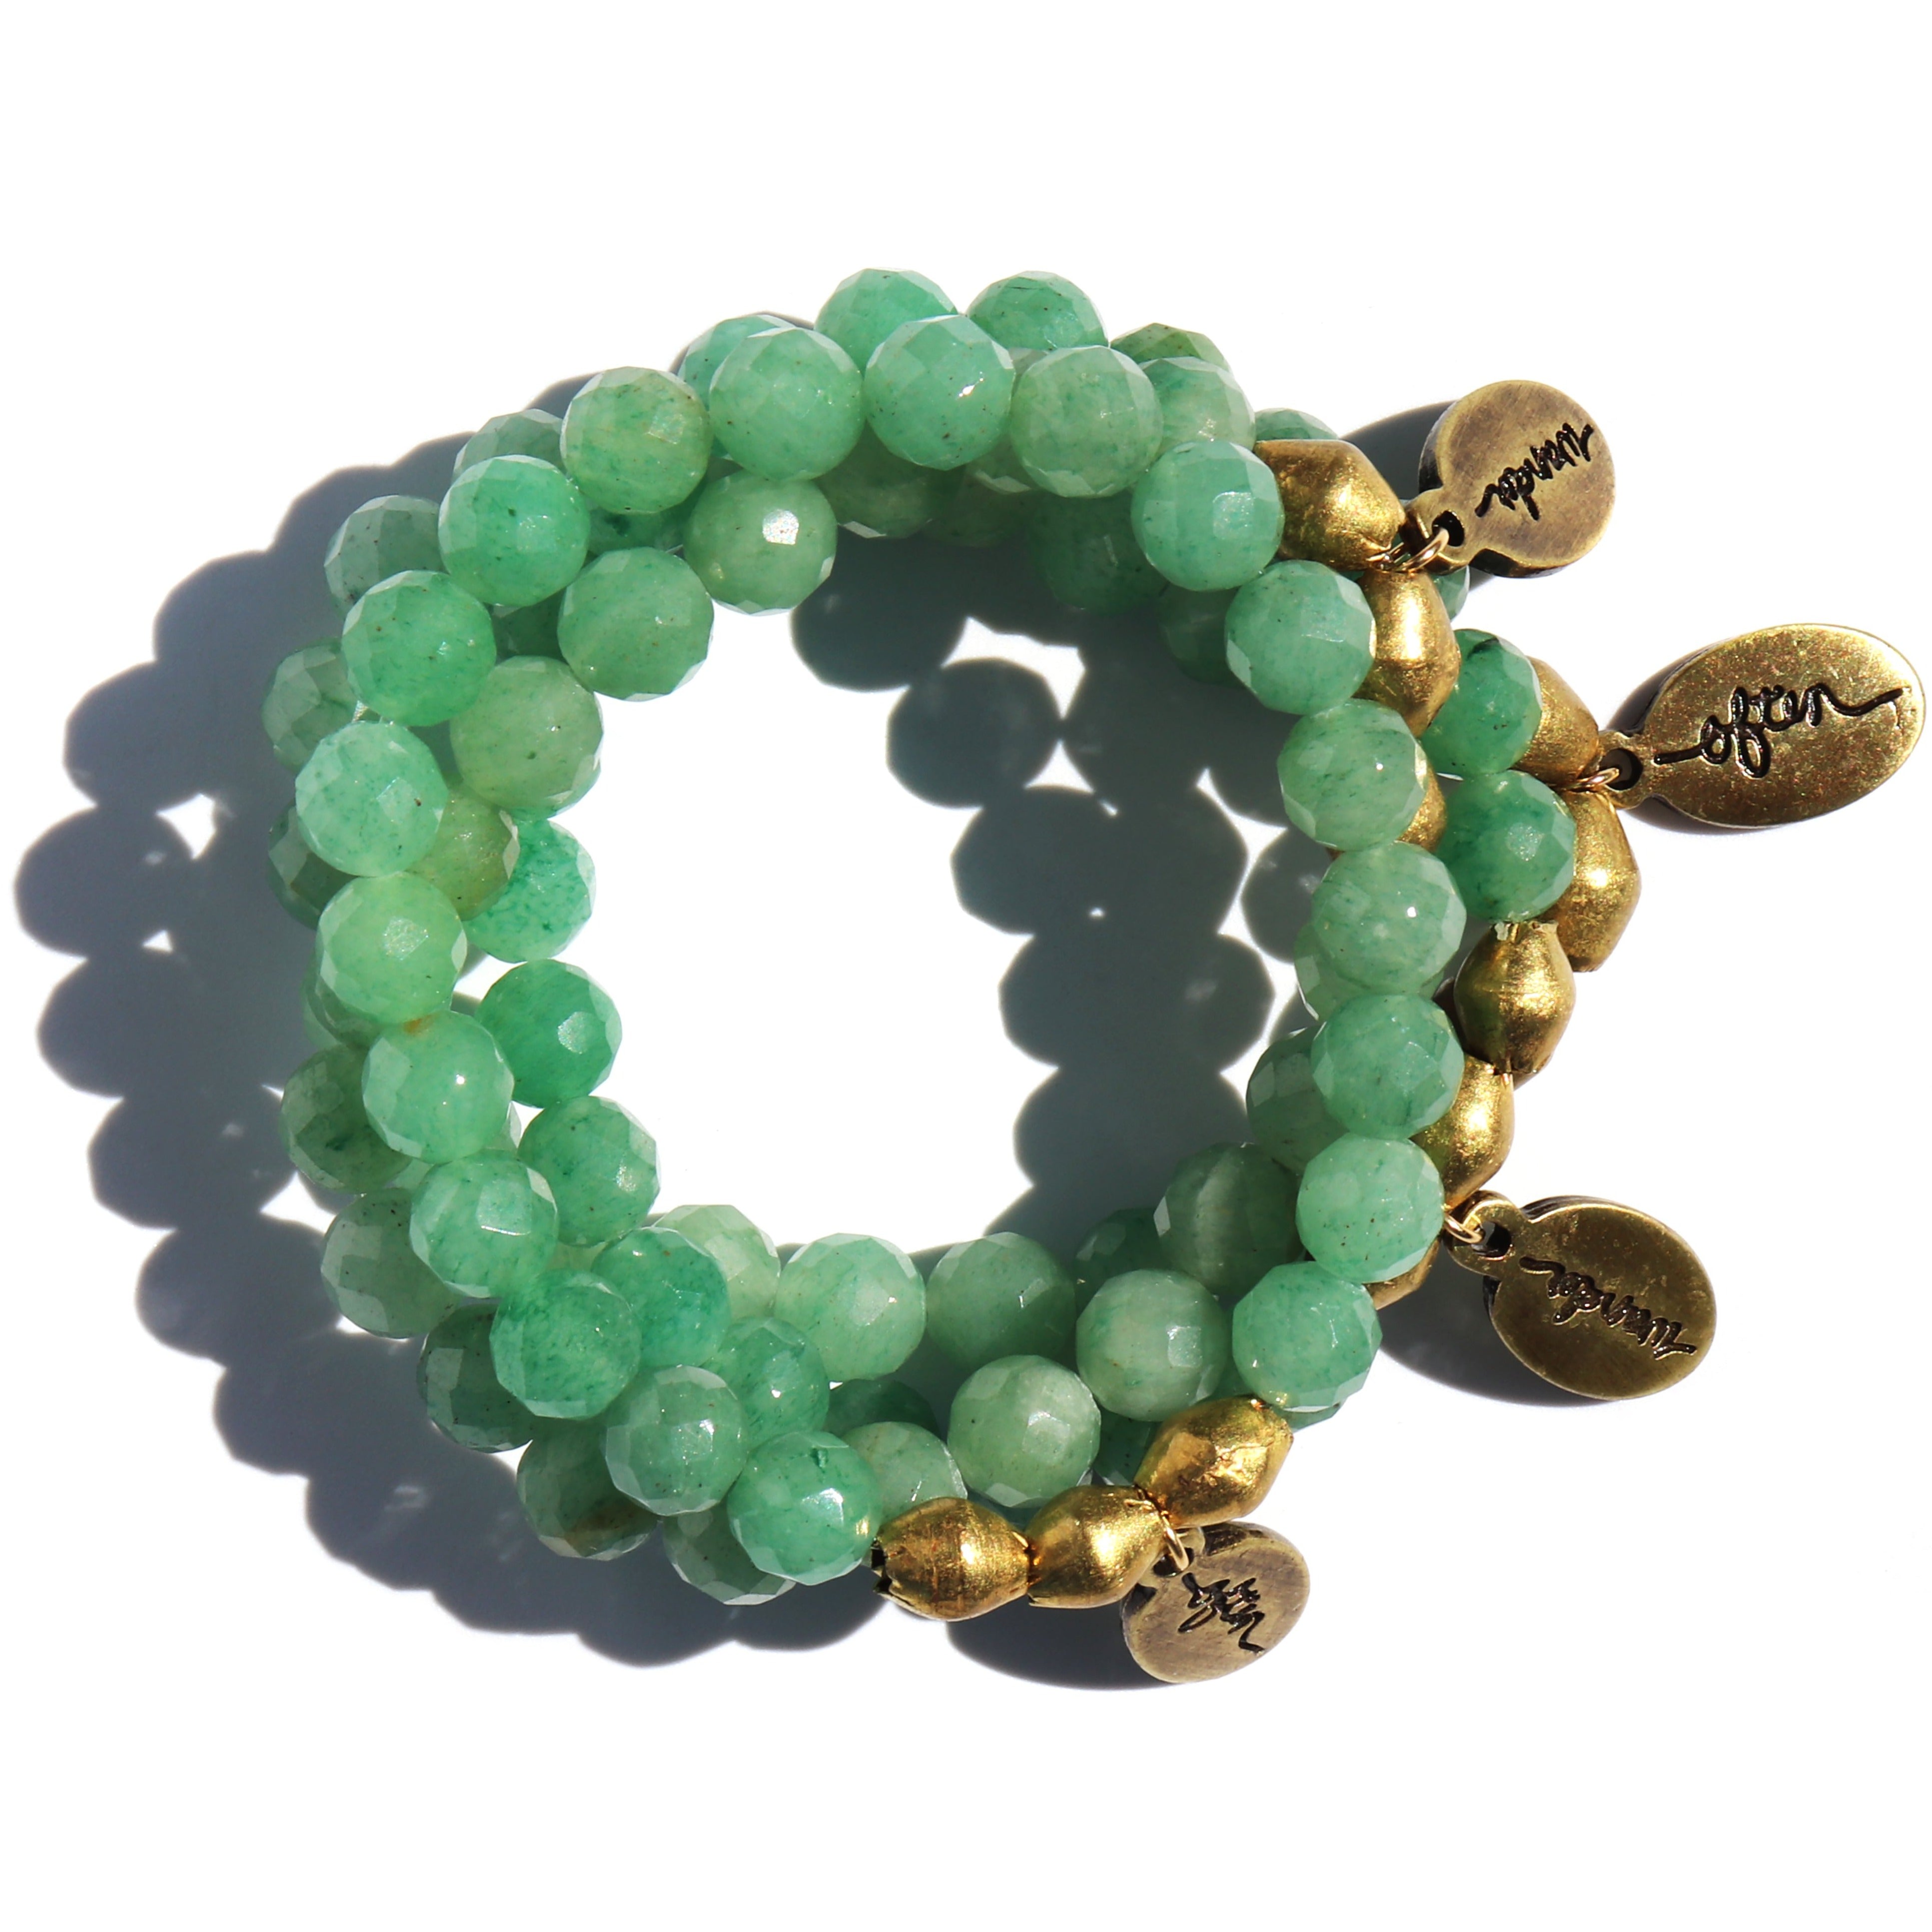 Lab Certified Natural Green Aventurine Stone Bracelet for Better Job  Opportunities, Increase Prosperity - Tantra Astro